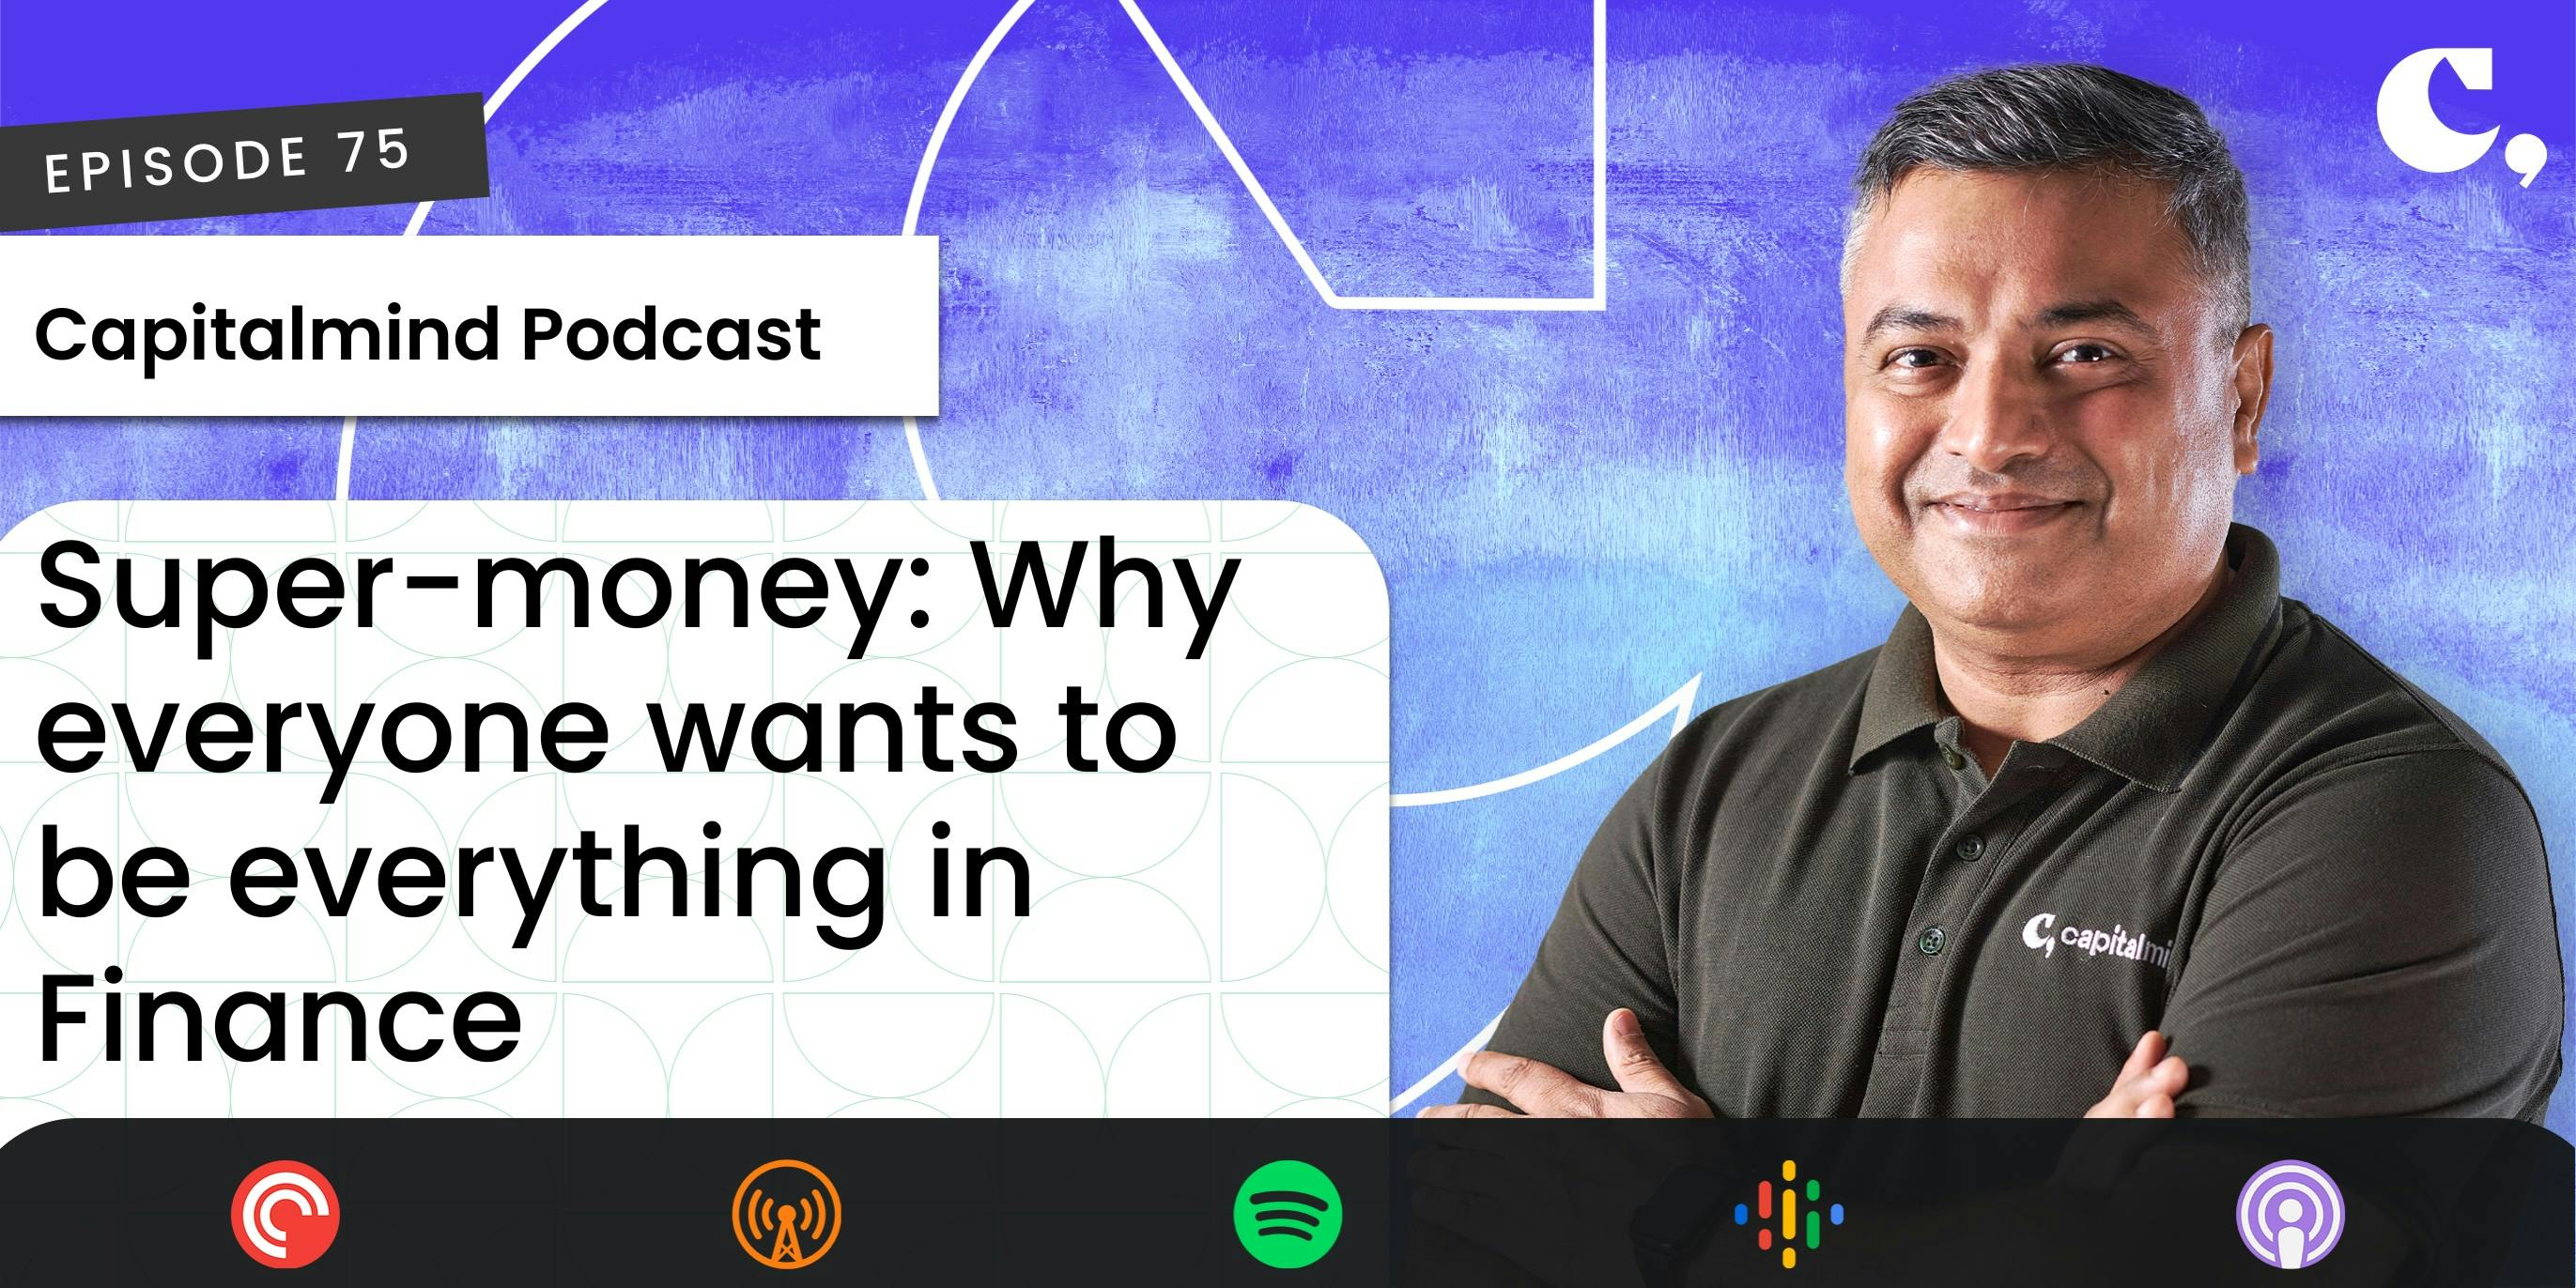 [Podcast] Why everyone wants to be everything in finance